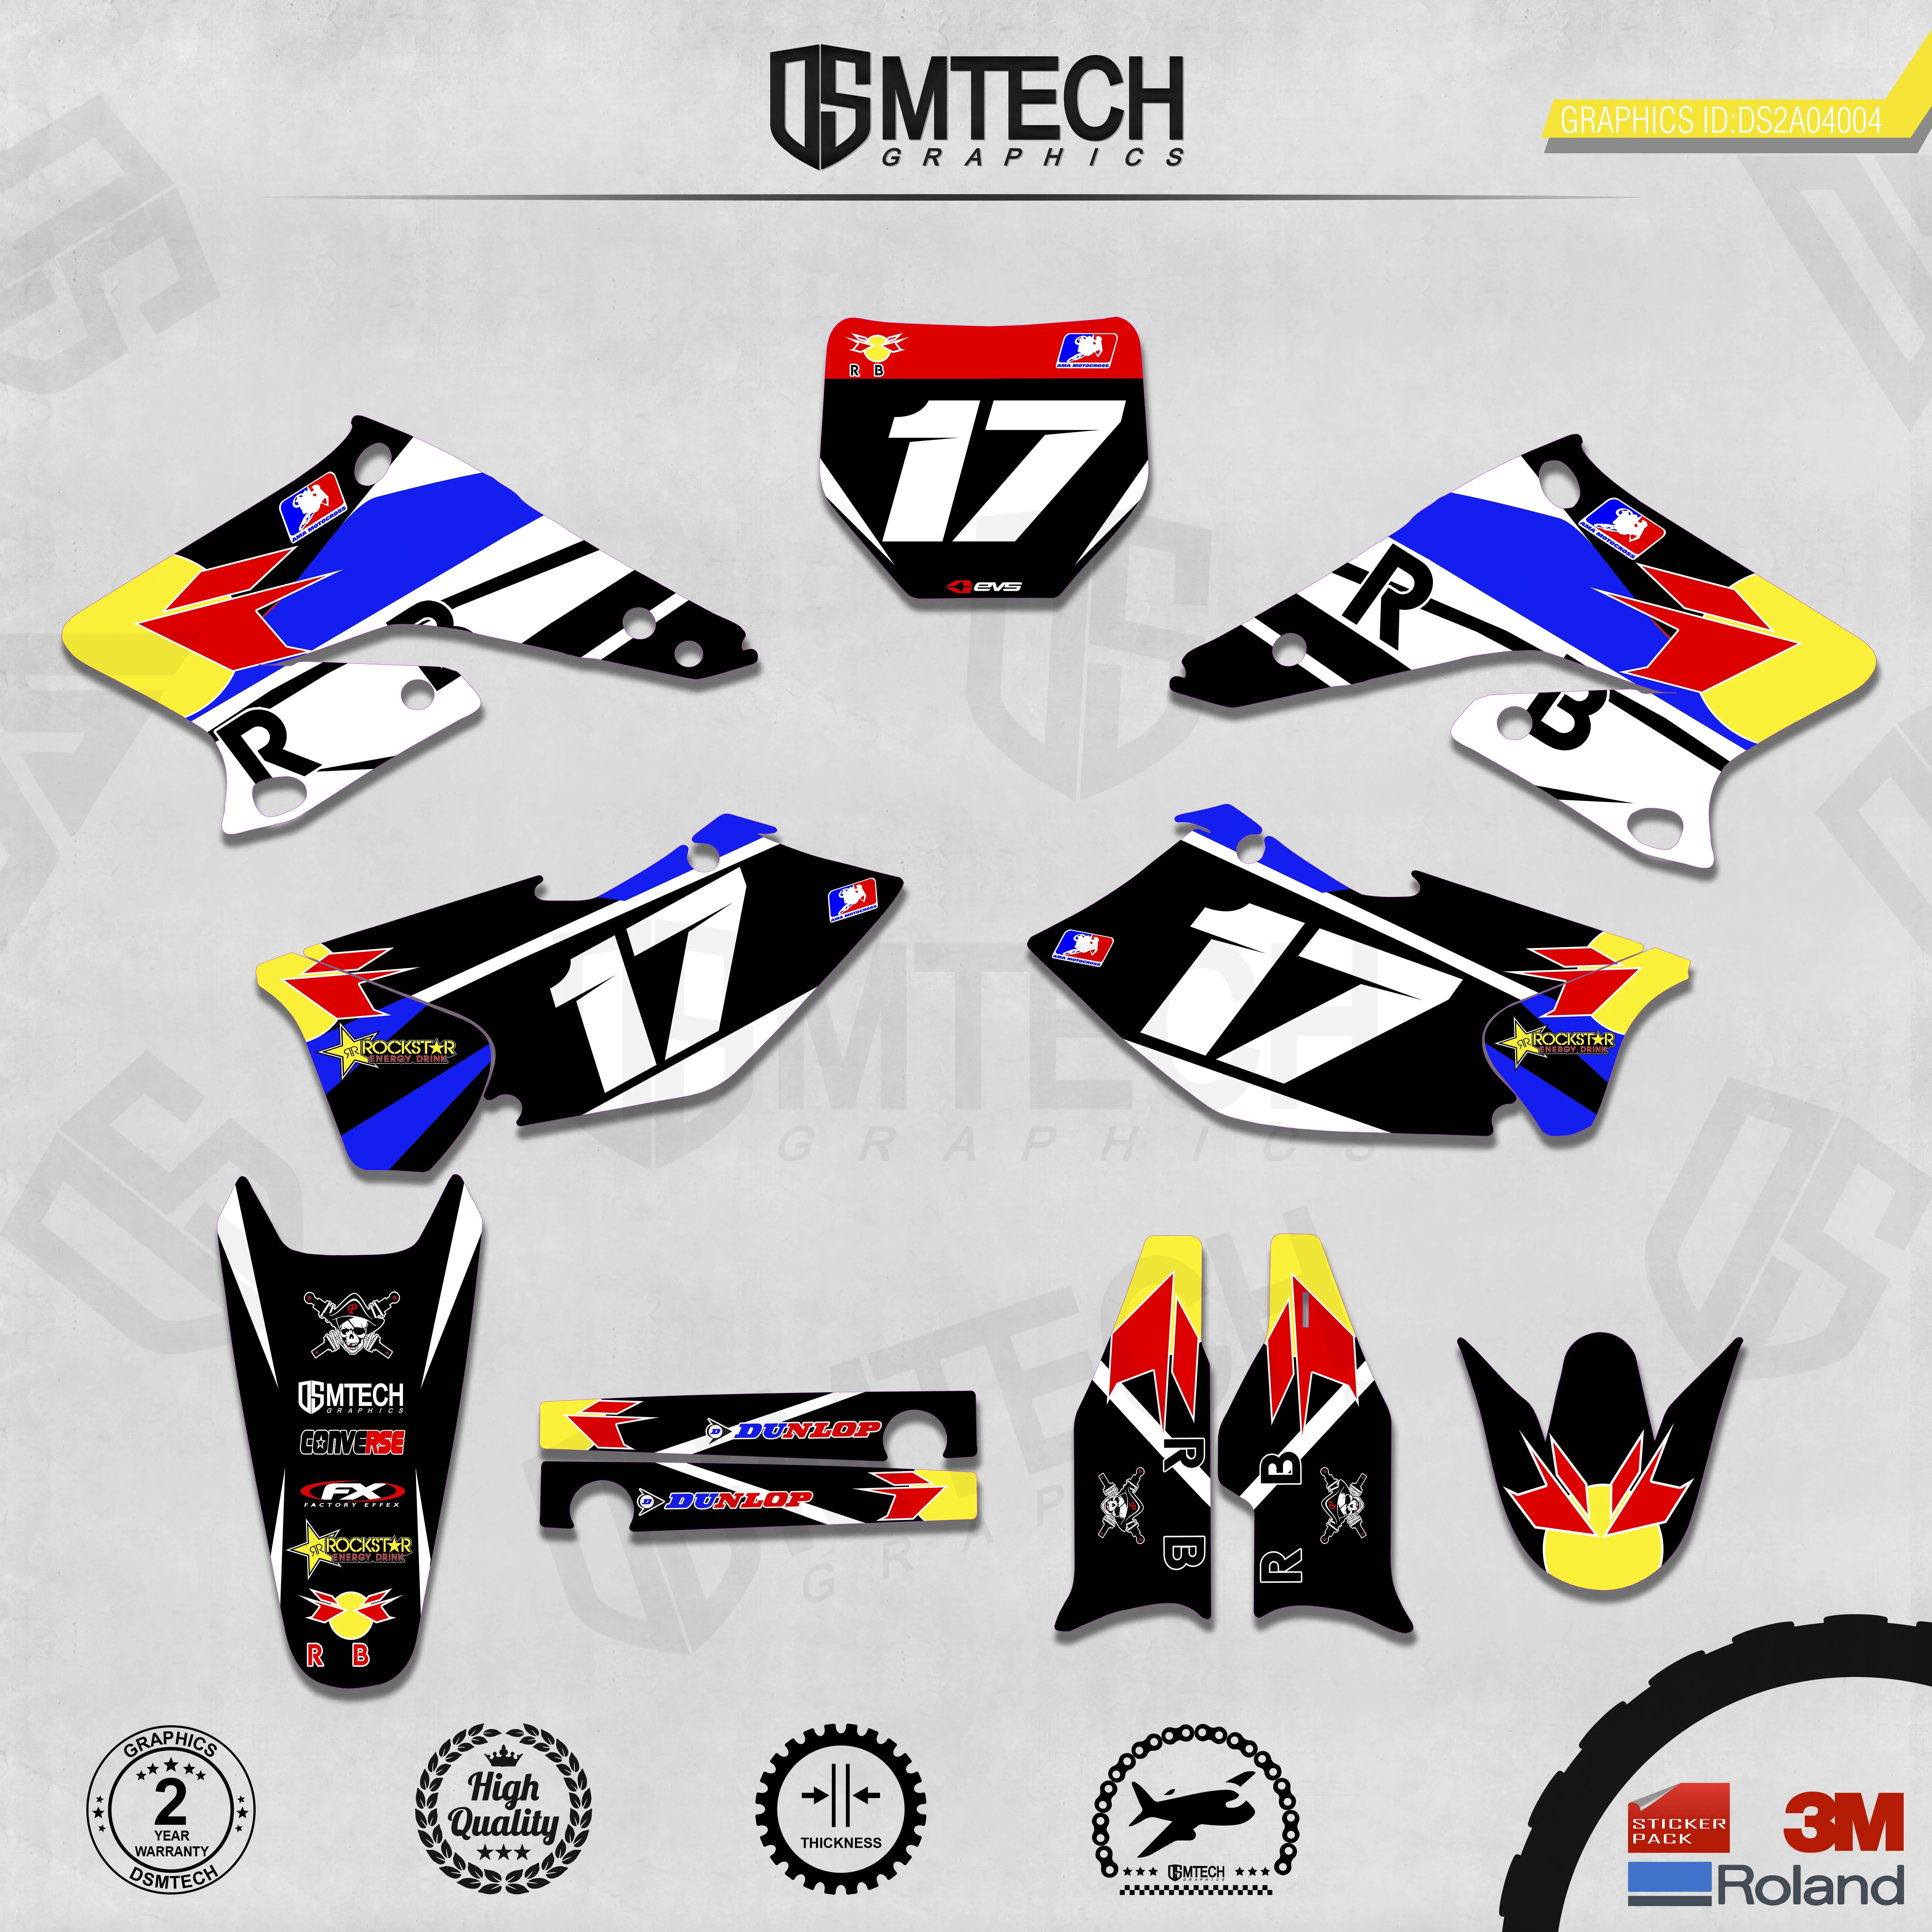 DSMTECH Customized Team Graphics Backgrounds Decals 3M Custom Stickers For 2004-2006 RMZ250  004